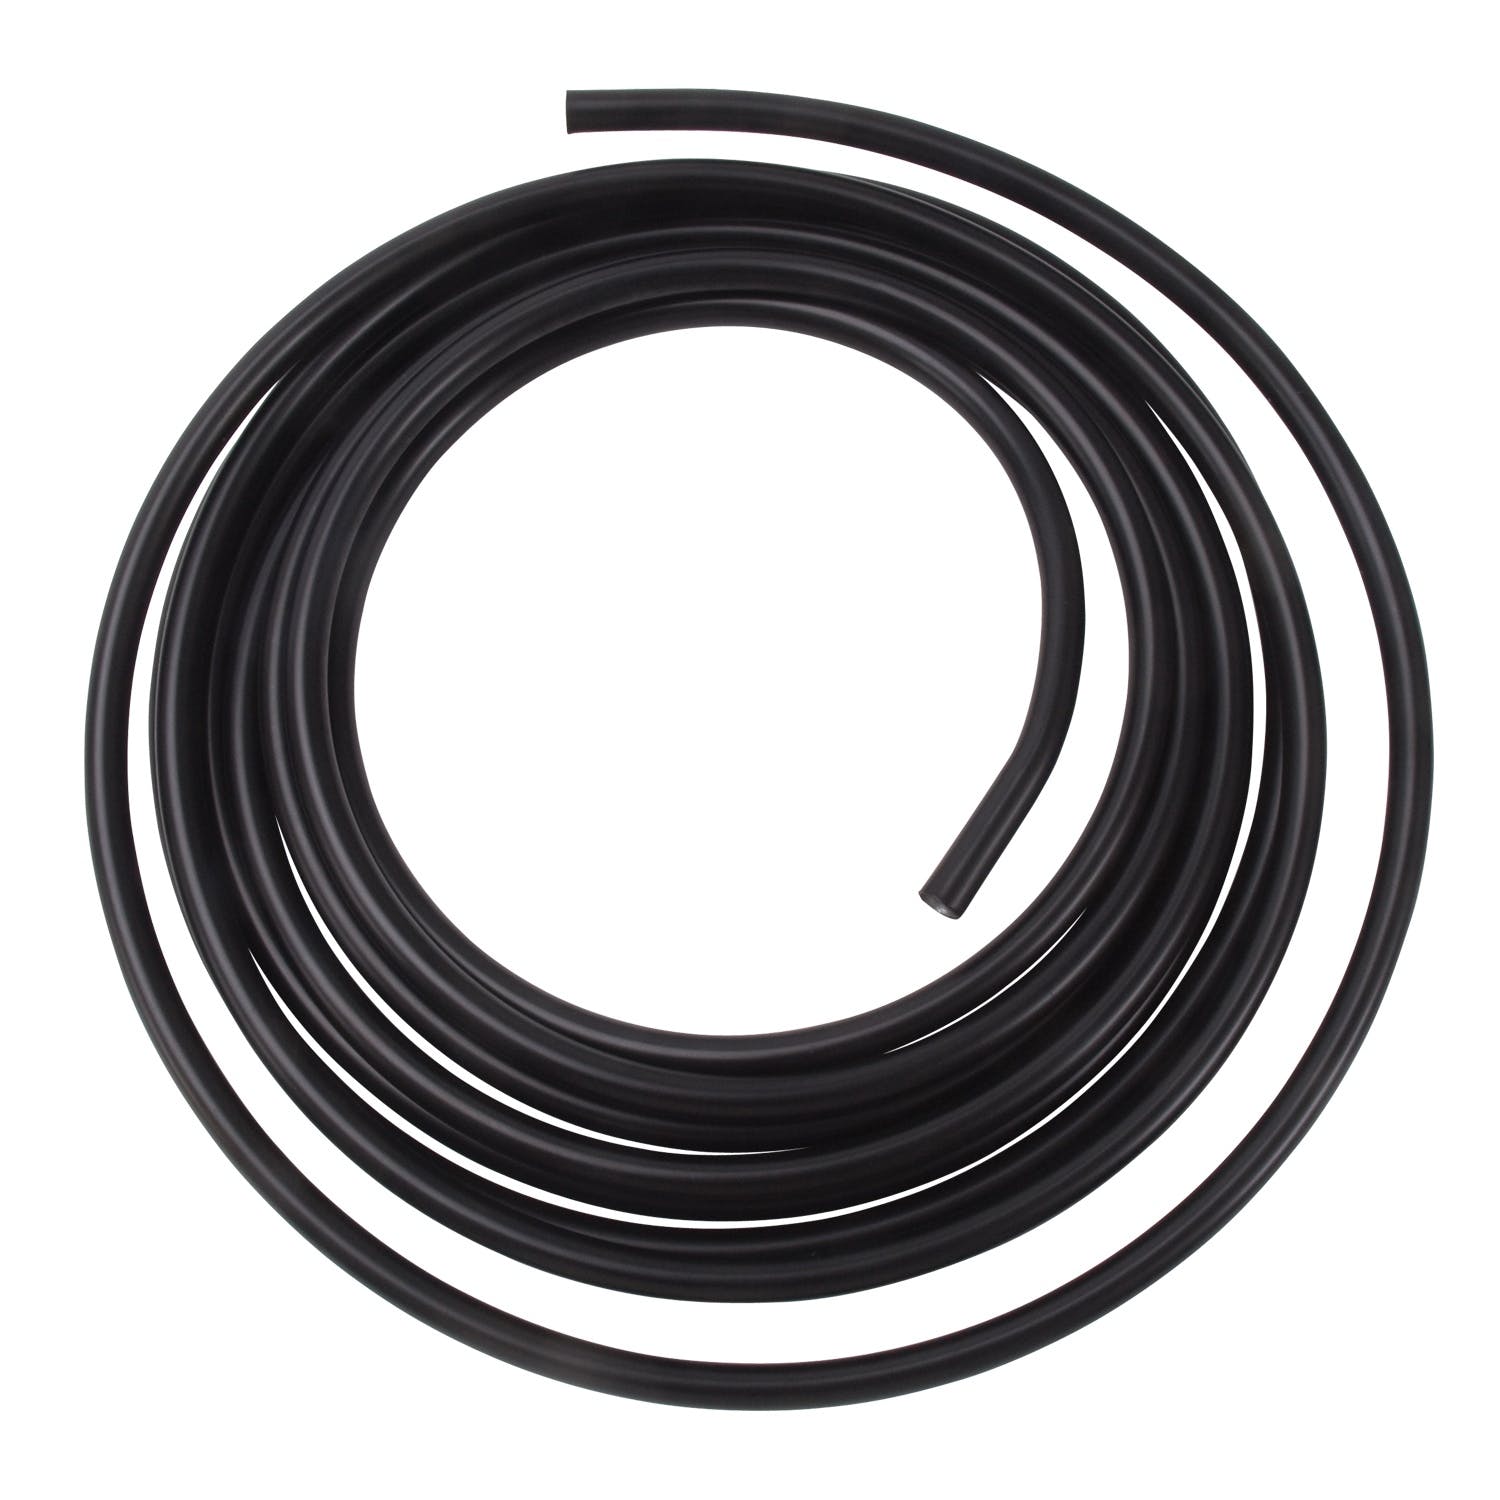 Russell 639253 Aluminum Fuel Line 3/8 inch OD Black